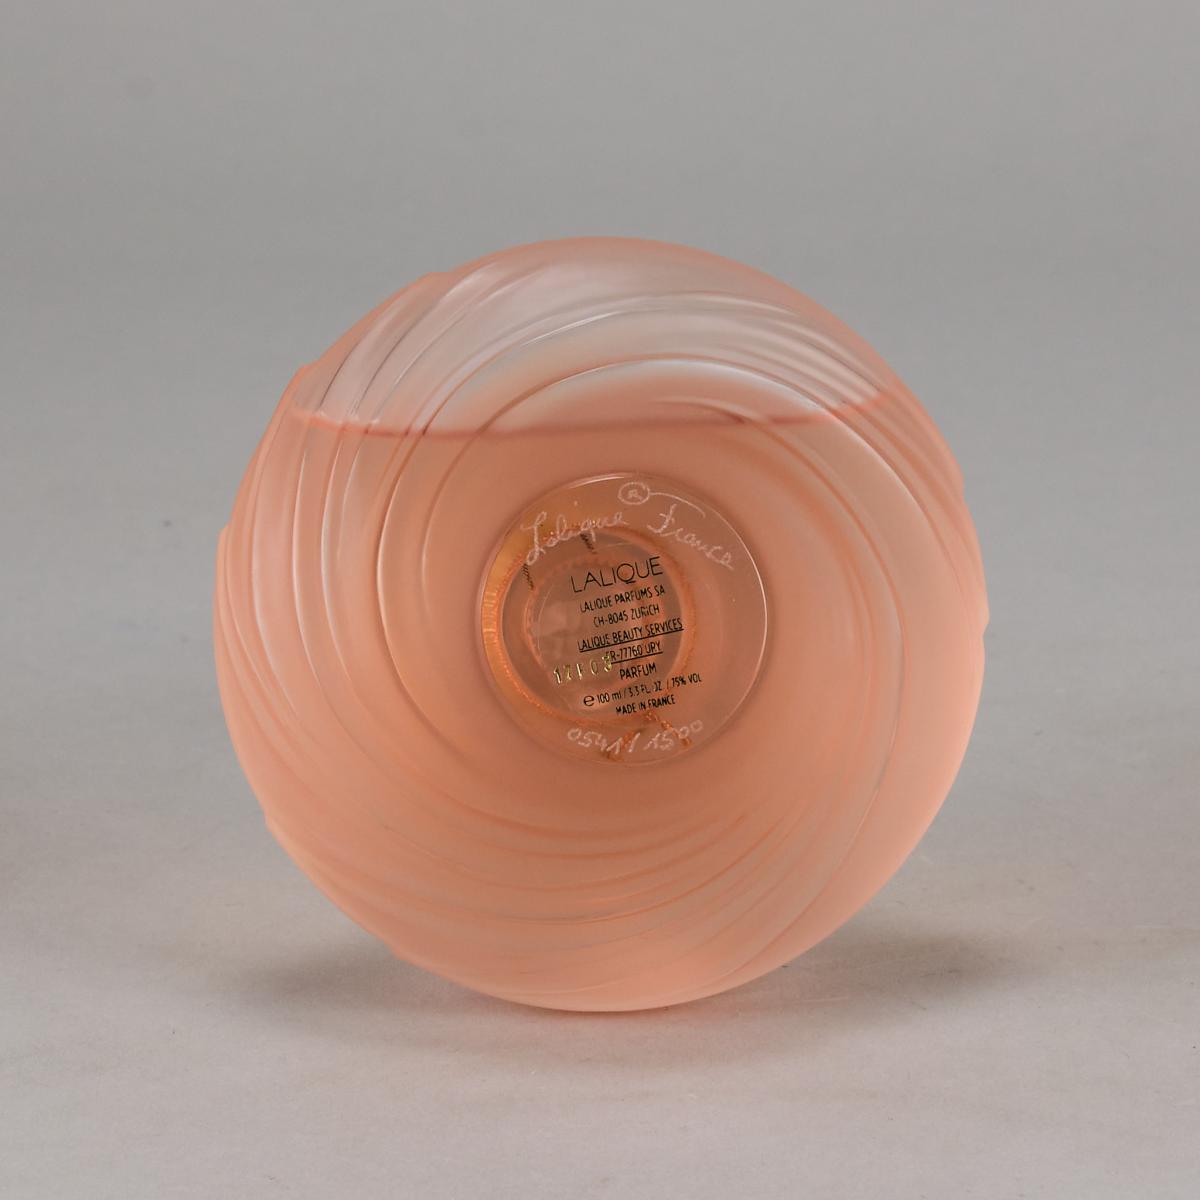  Contemporary Glass Perfume bottle entitled "Naiade" by Lalique Glass